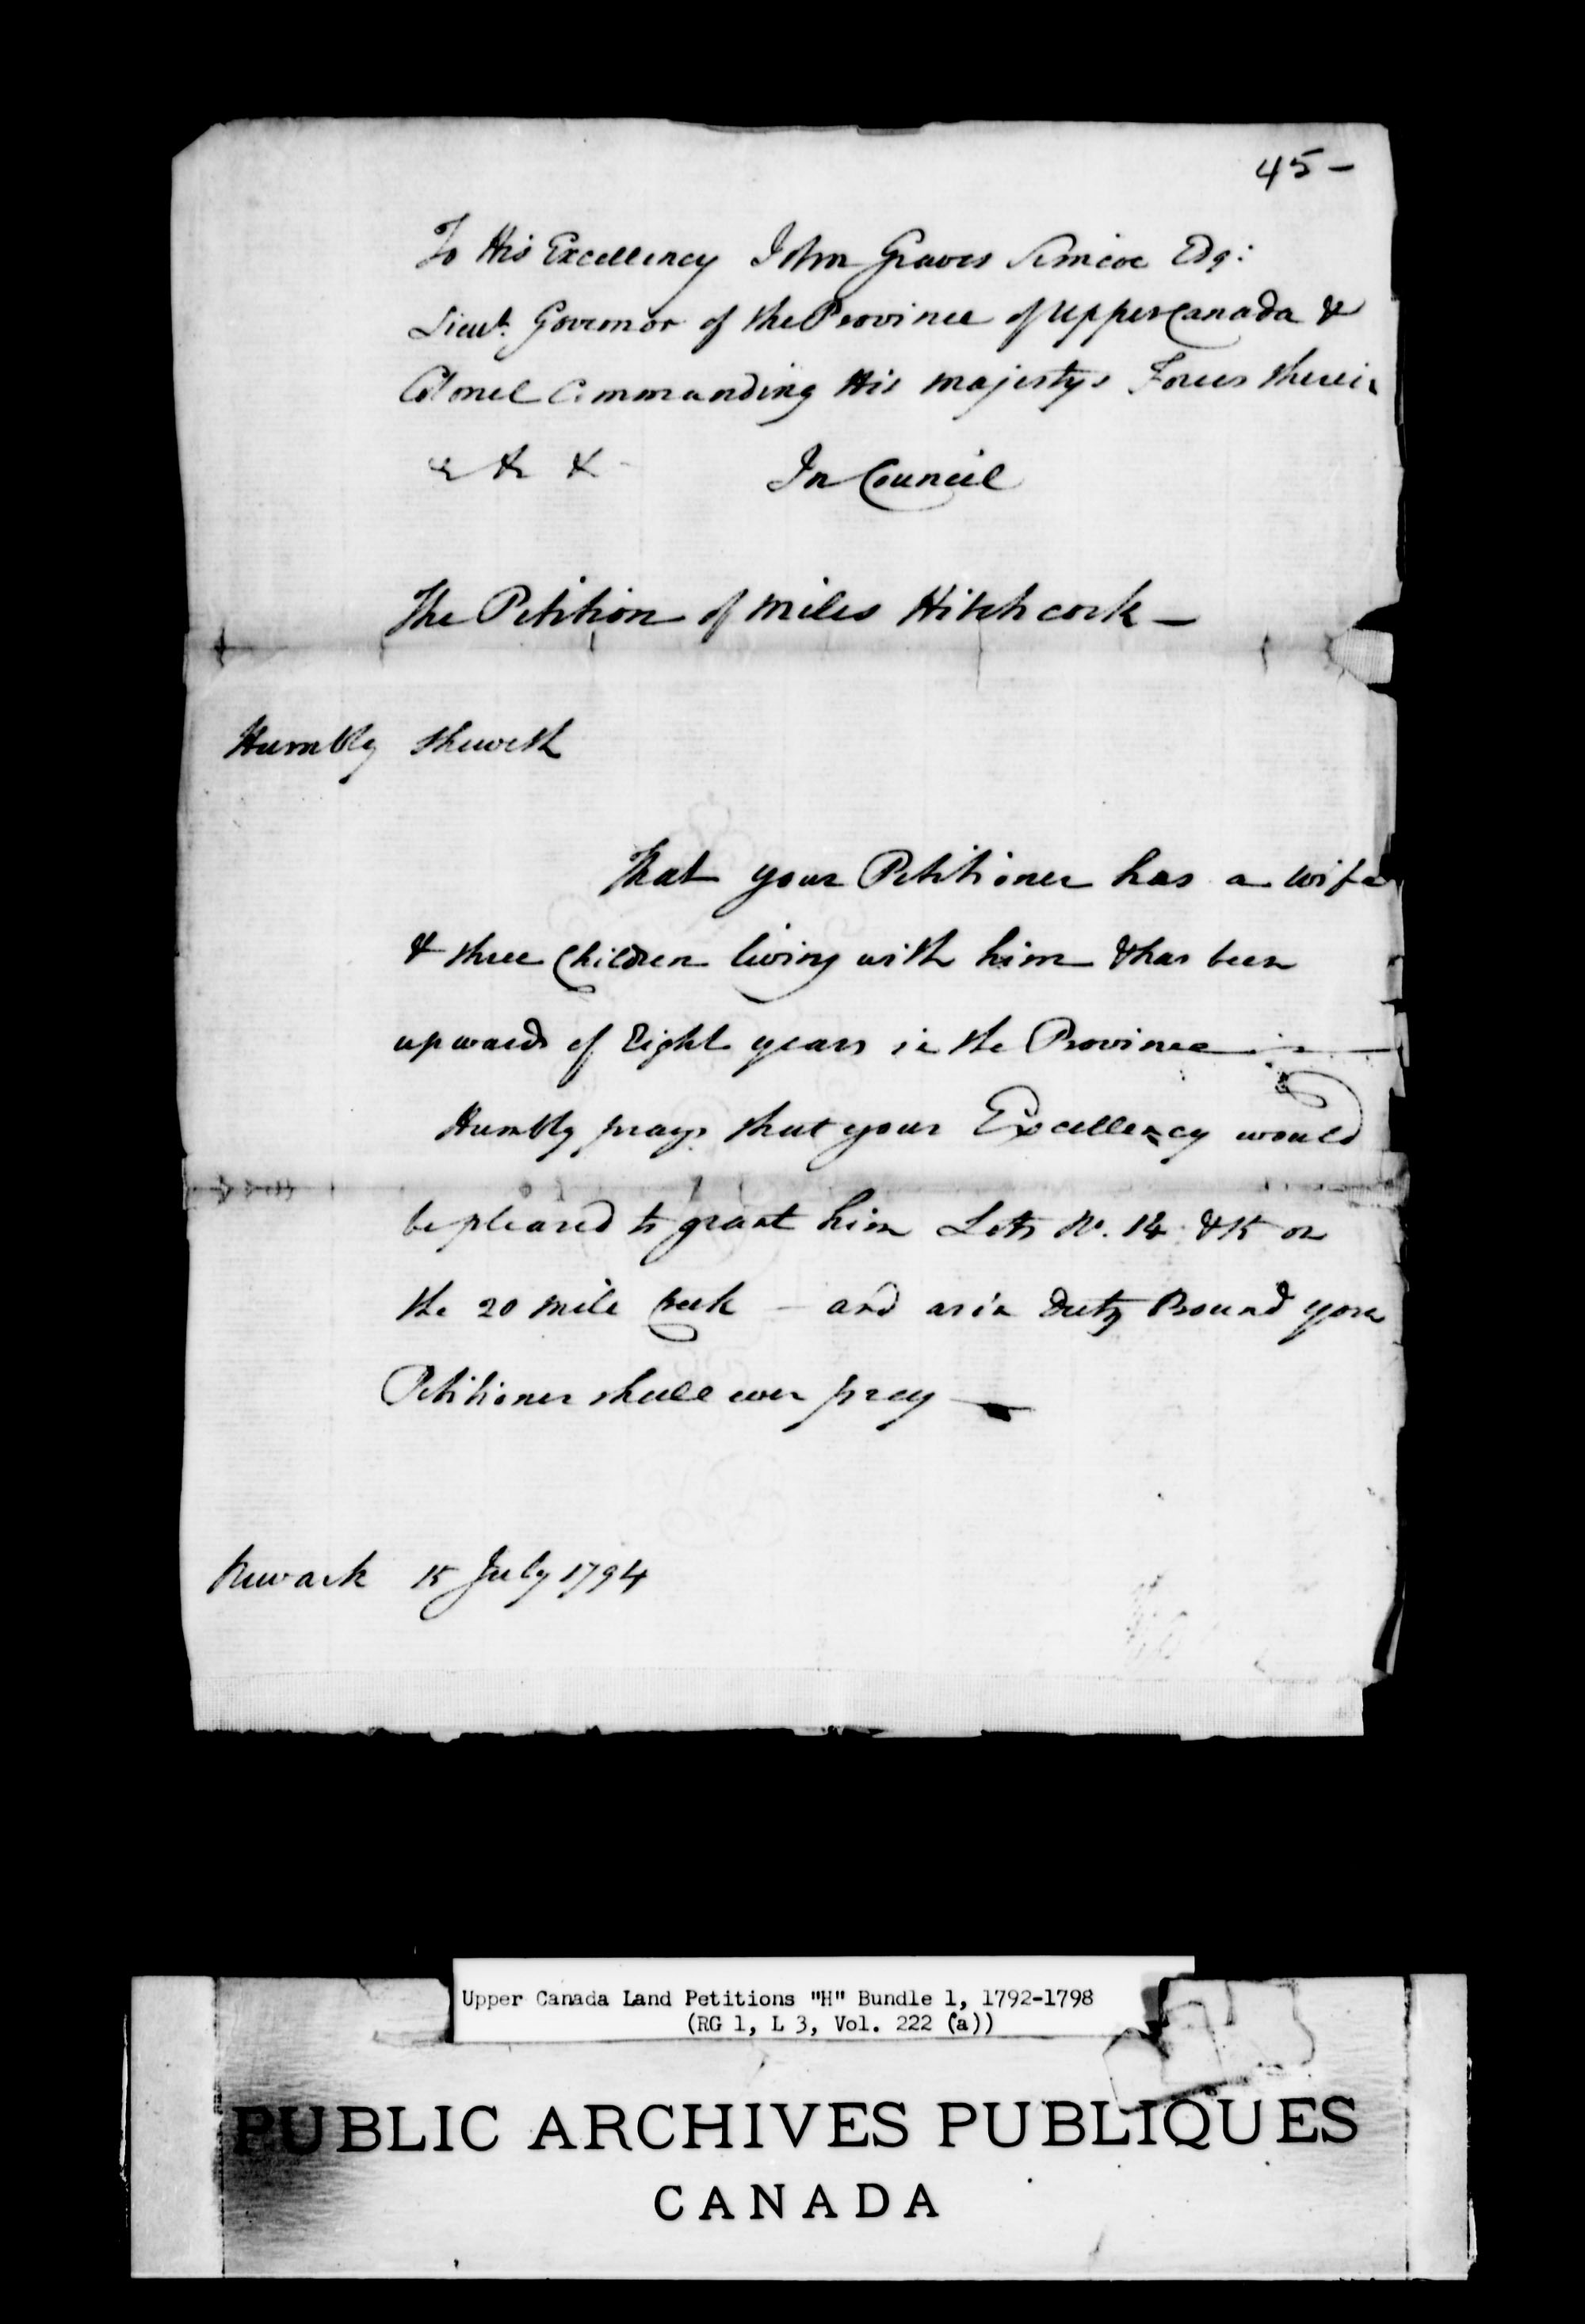 Title: Upper Canada Land Petitions (1763-1865) - Mikan Number: 205131 - Microform: c-2042